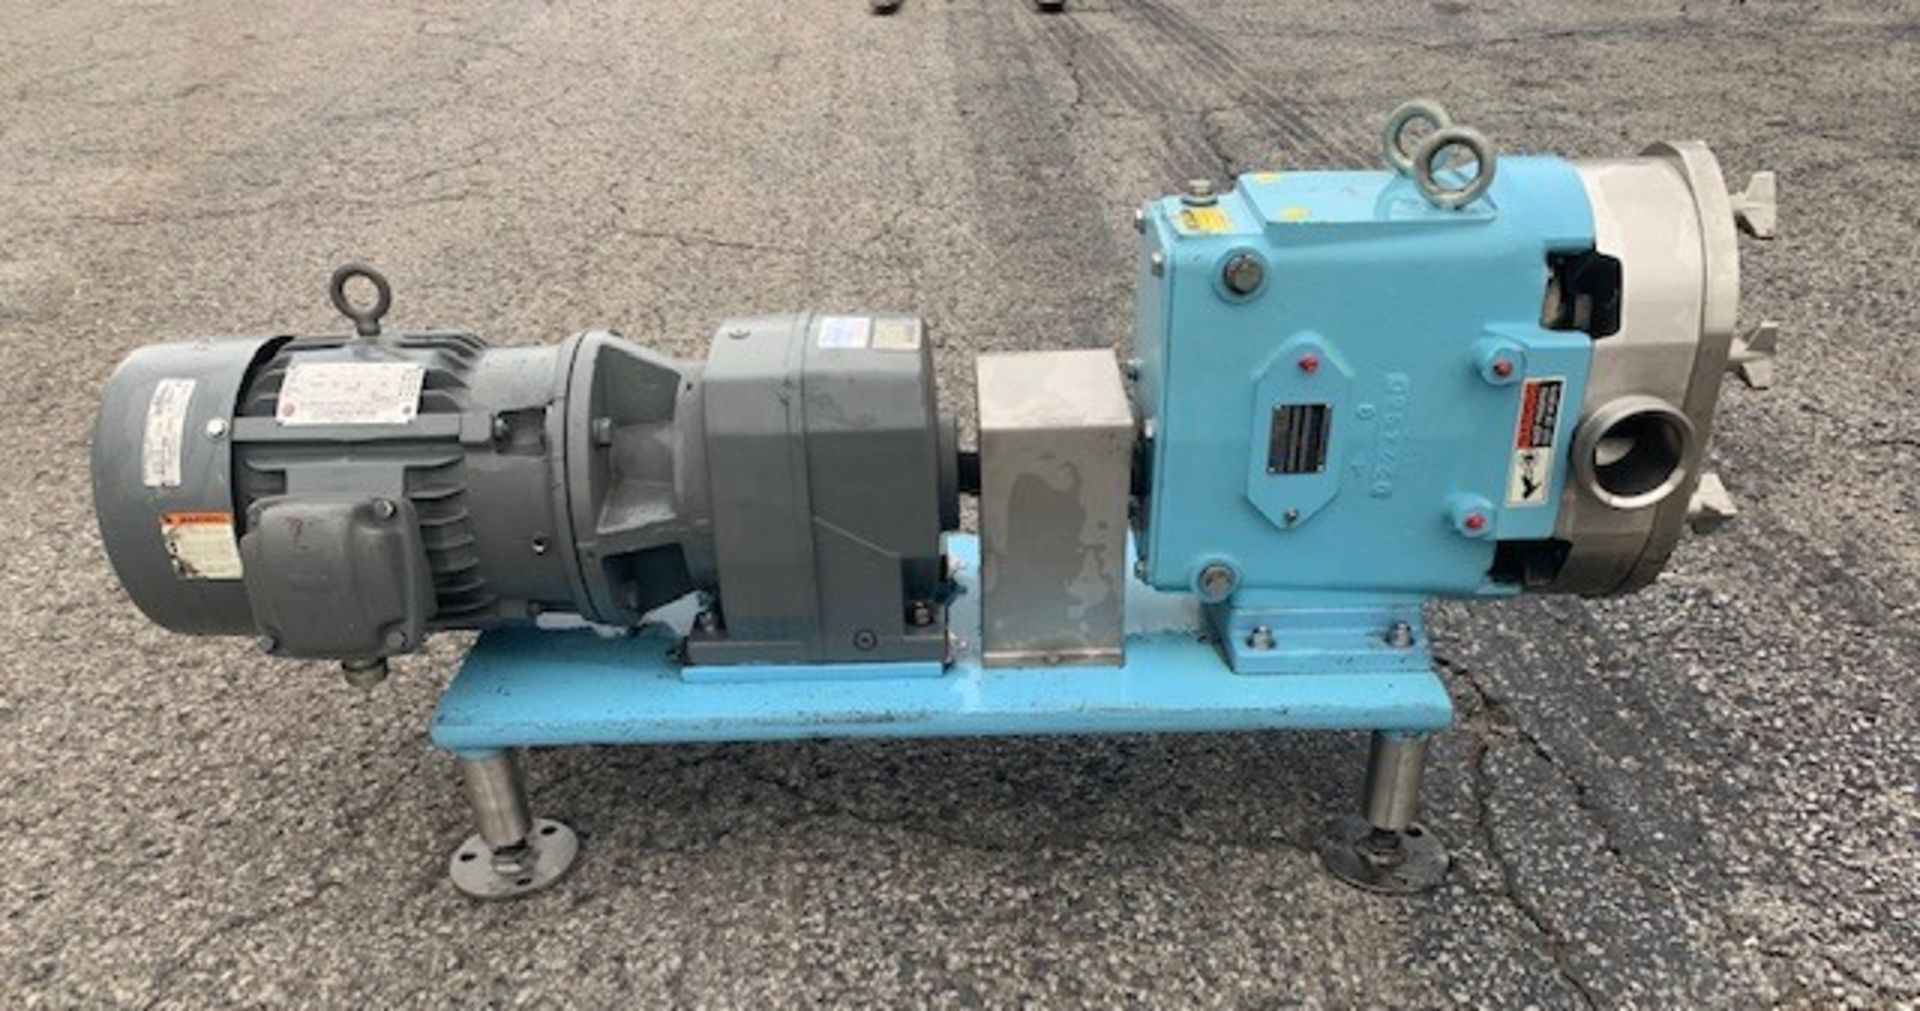 Waukesha 060 Positive Displacement Pump with Sterling Gear Reduction, Powered by 3 hp Motor, - Image 4 of 7